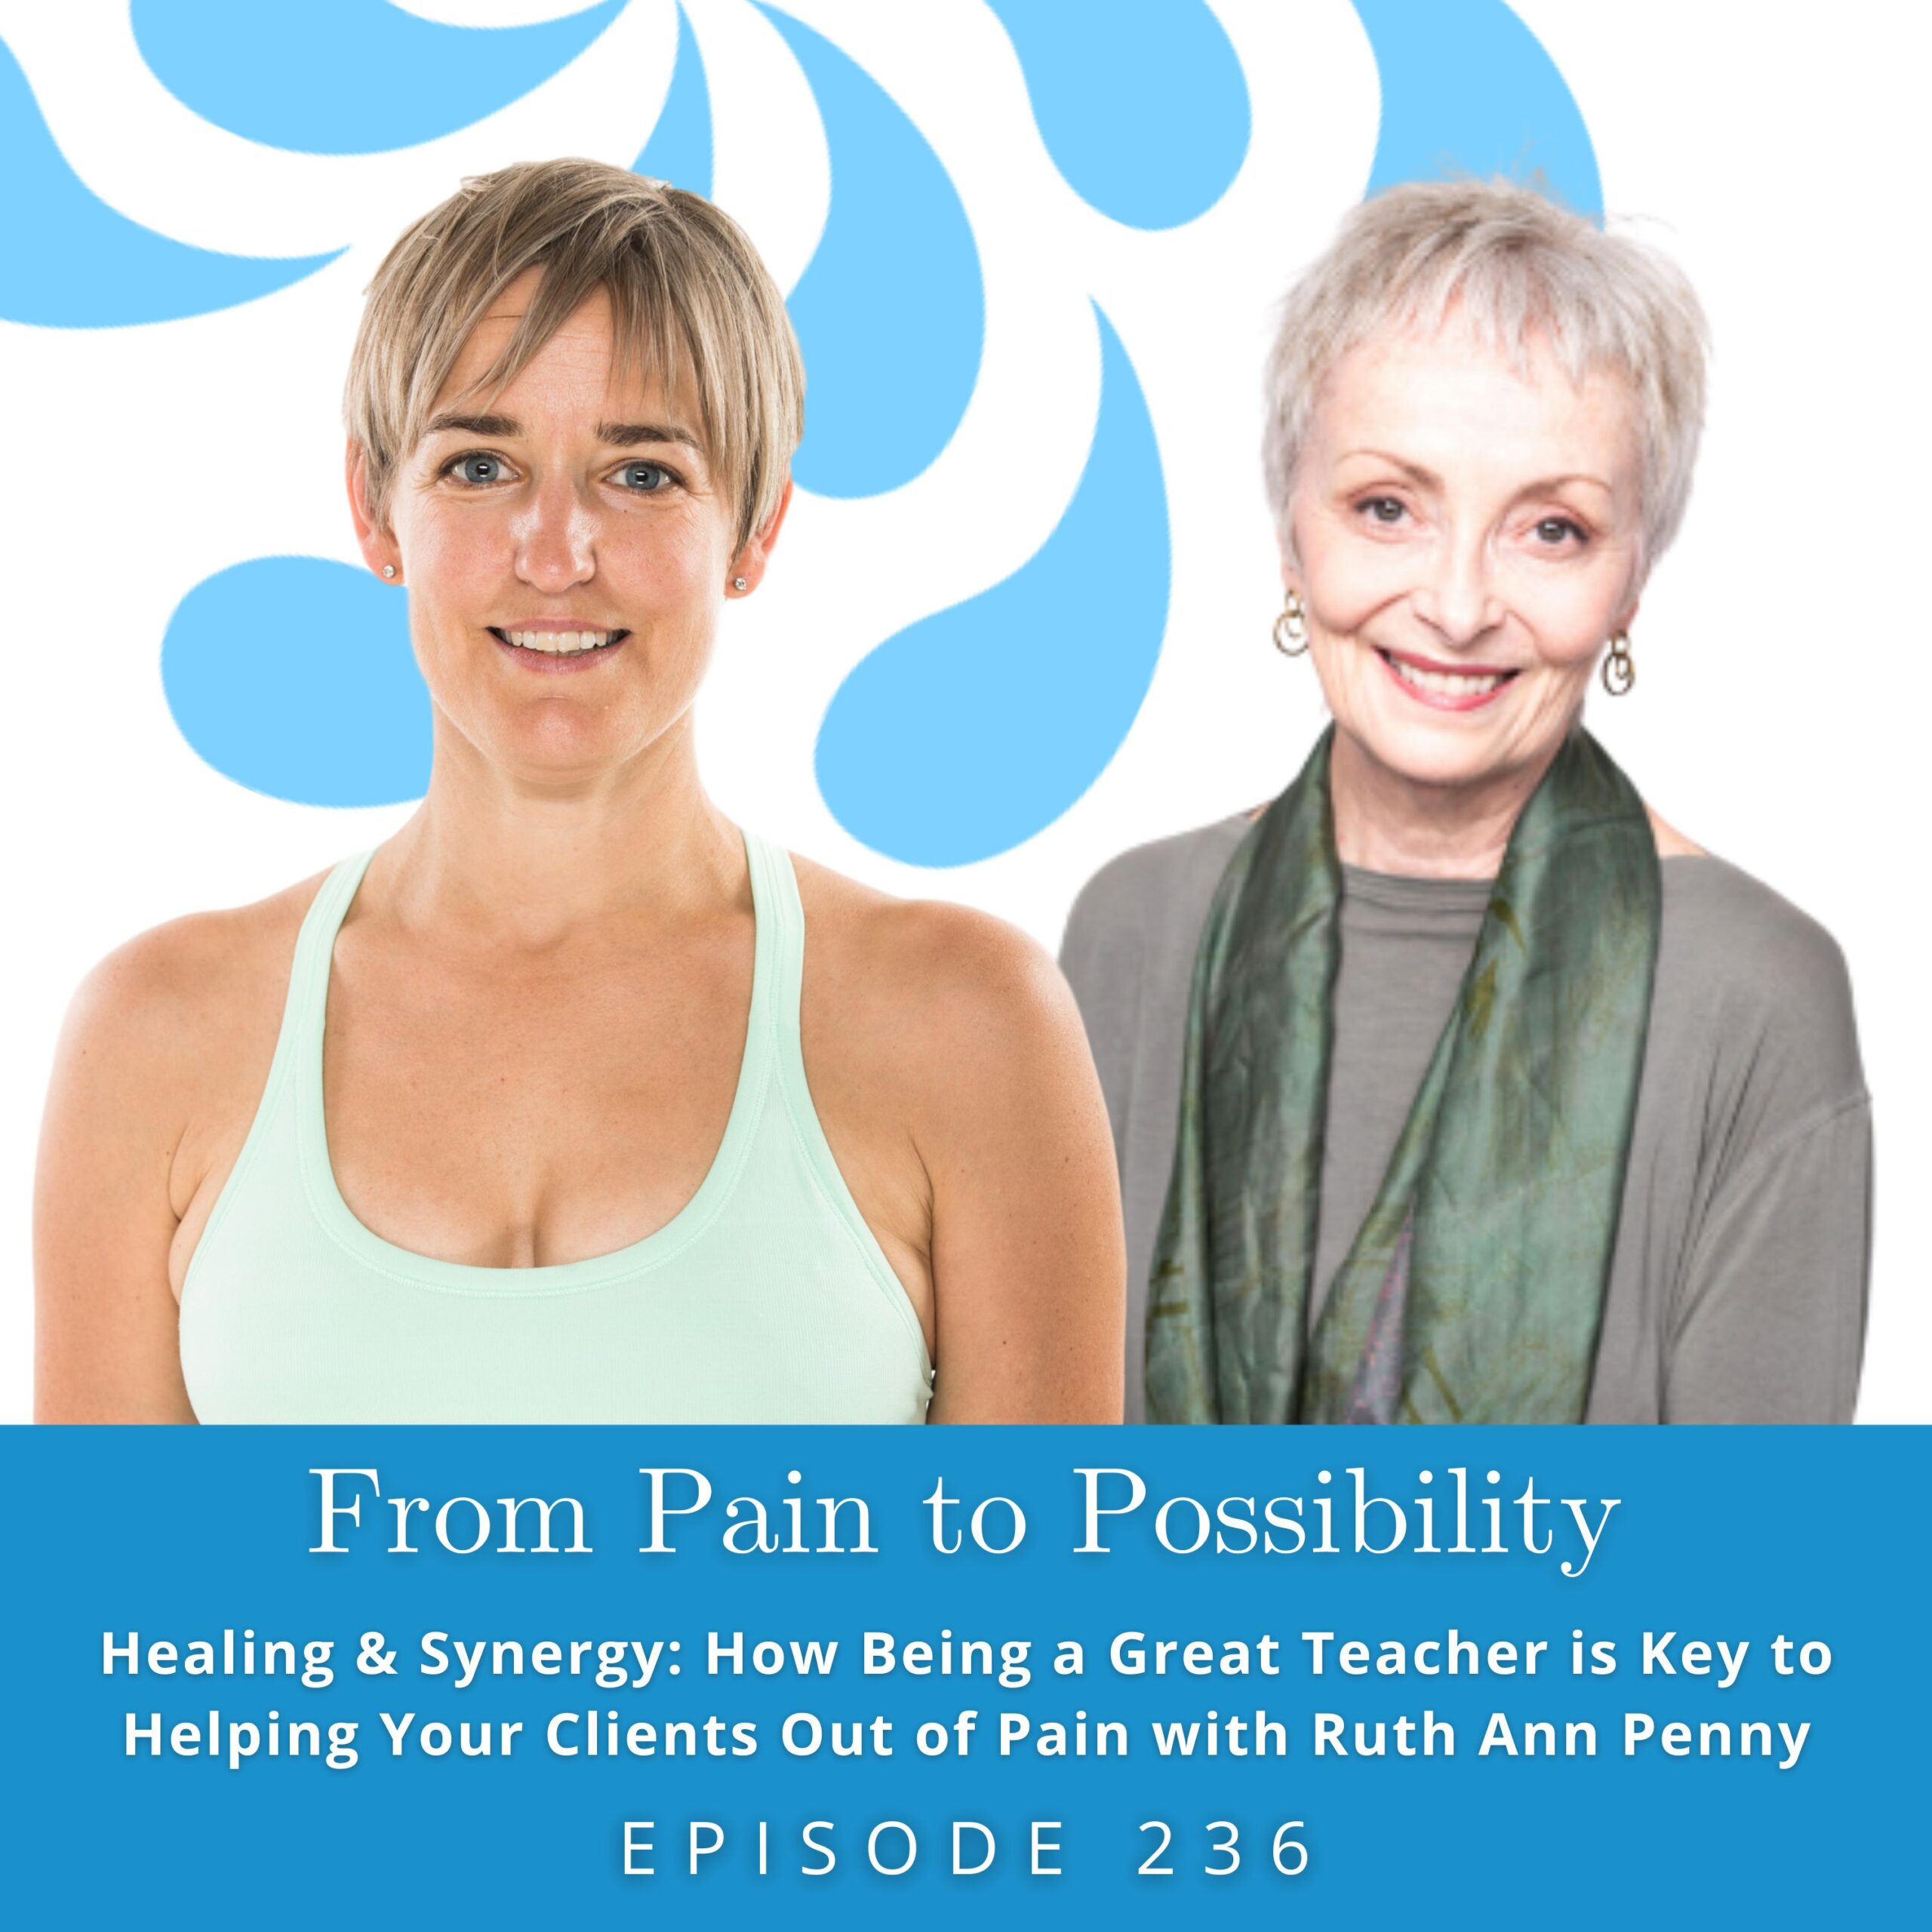 From Pain to Possibility with Susi Hately | Healing & Synergy: How Being a Great Teacher is Key to Helping Your Clients Out of Pain with Ruth Ann Penny